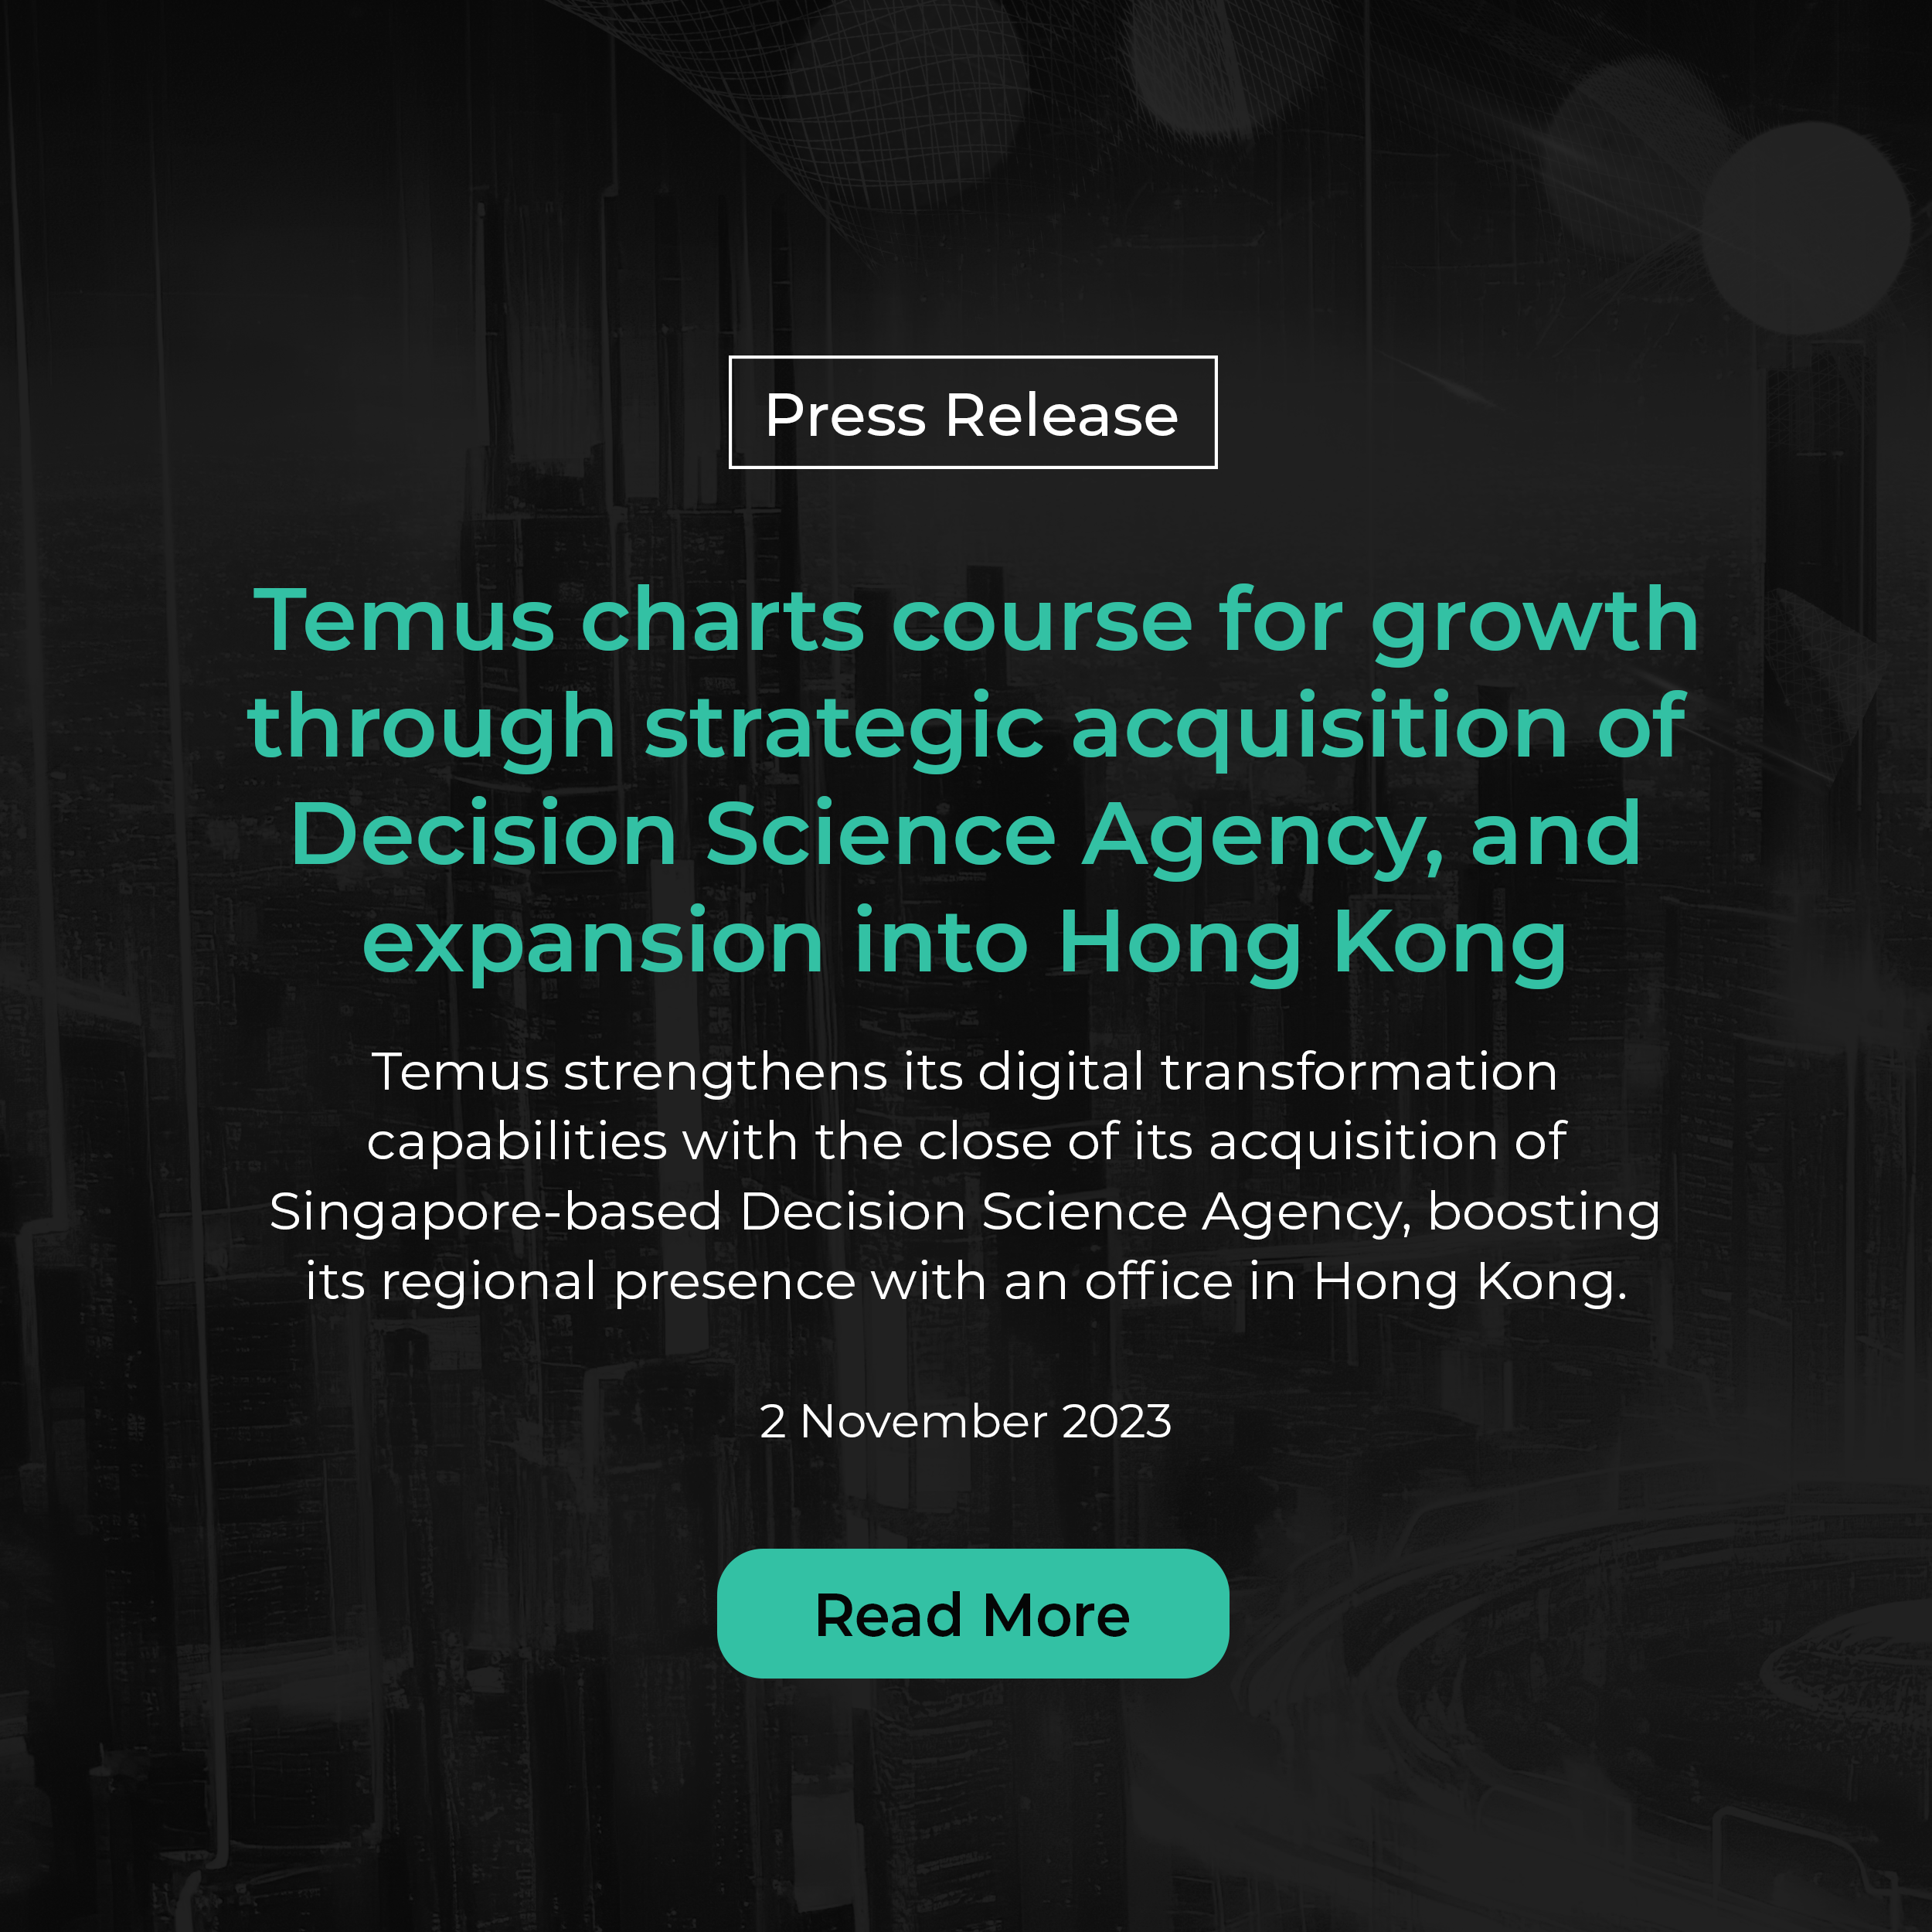 Press Release: Temus Charts Course for Growth Through Strategic Acquisition of Decision Science Agency, and Expansion into Hong Kong